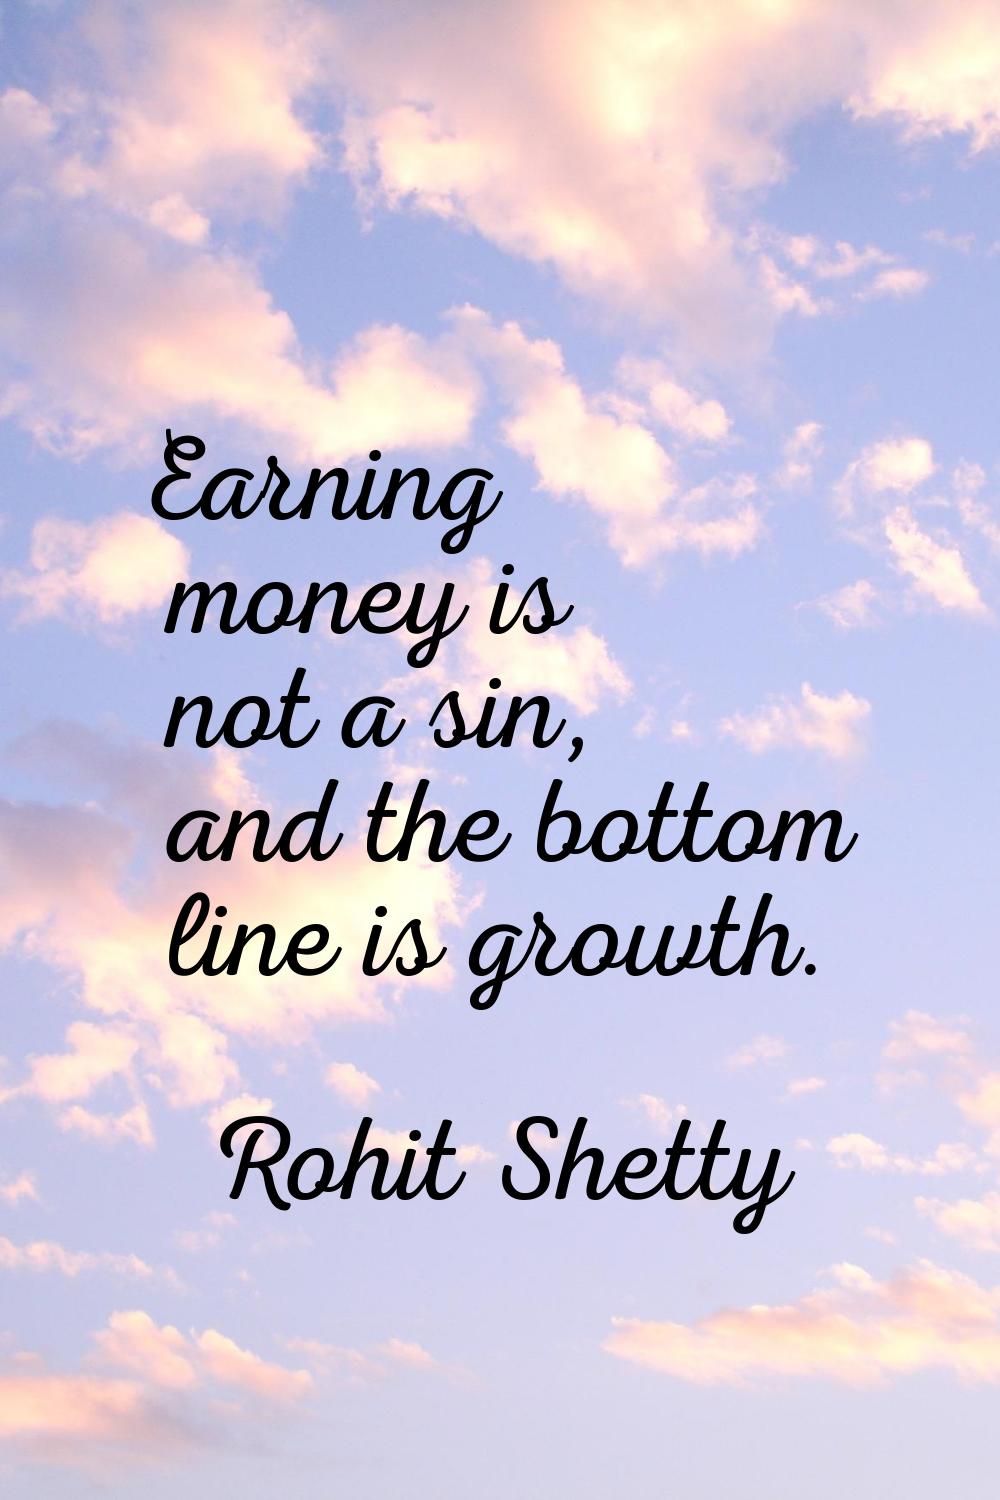 Earning money is not a sin, and the bottom line is growth.